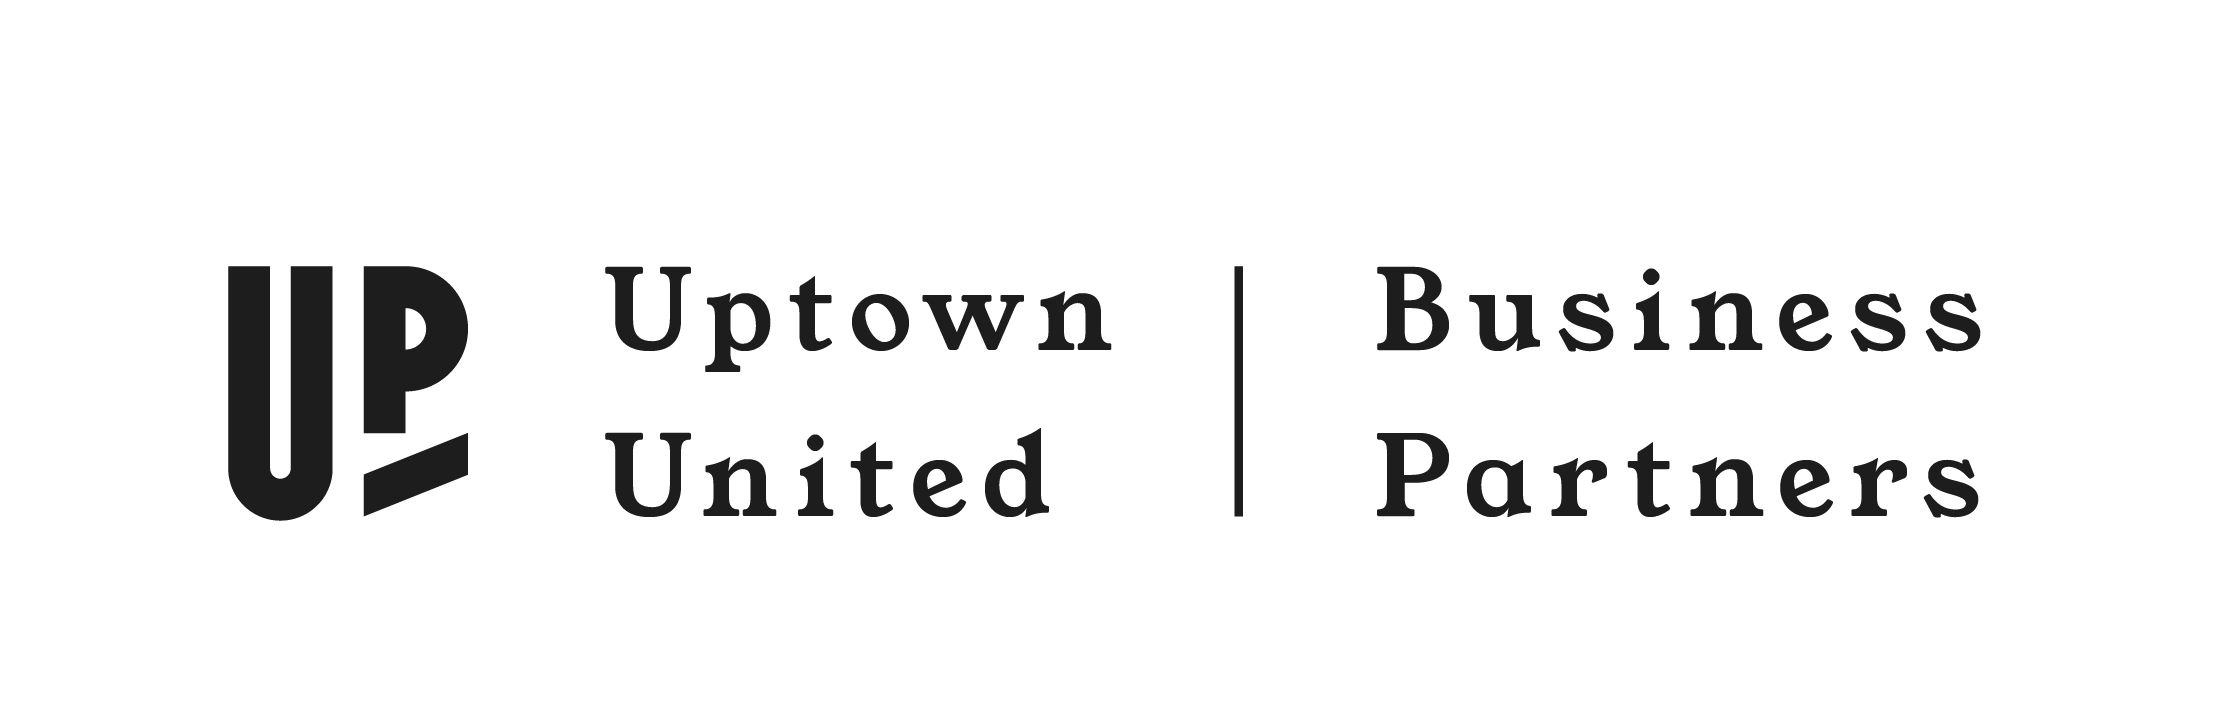 Uptown United Business Partners Logo-01